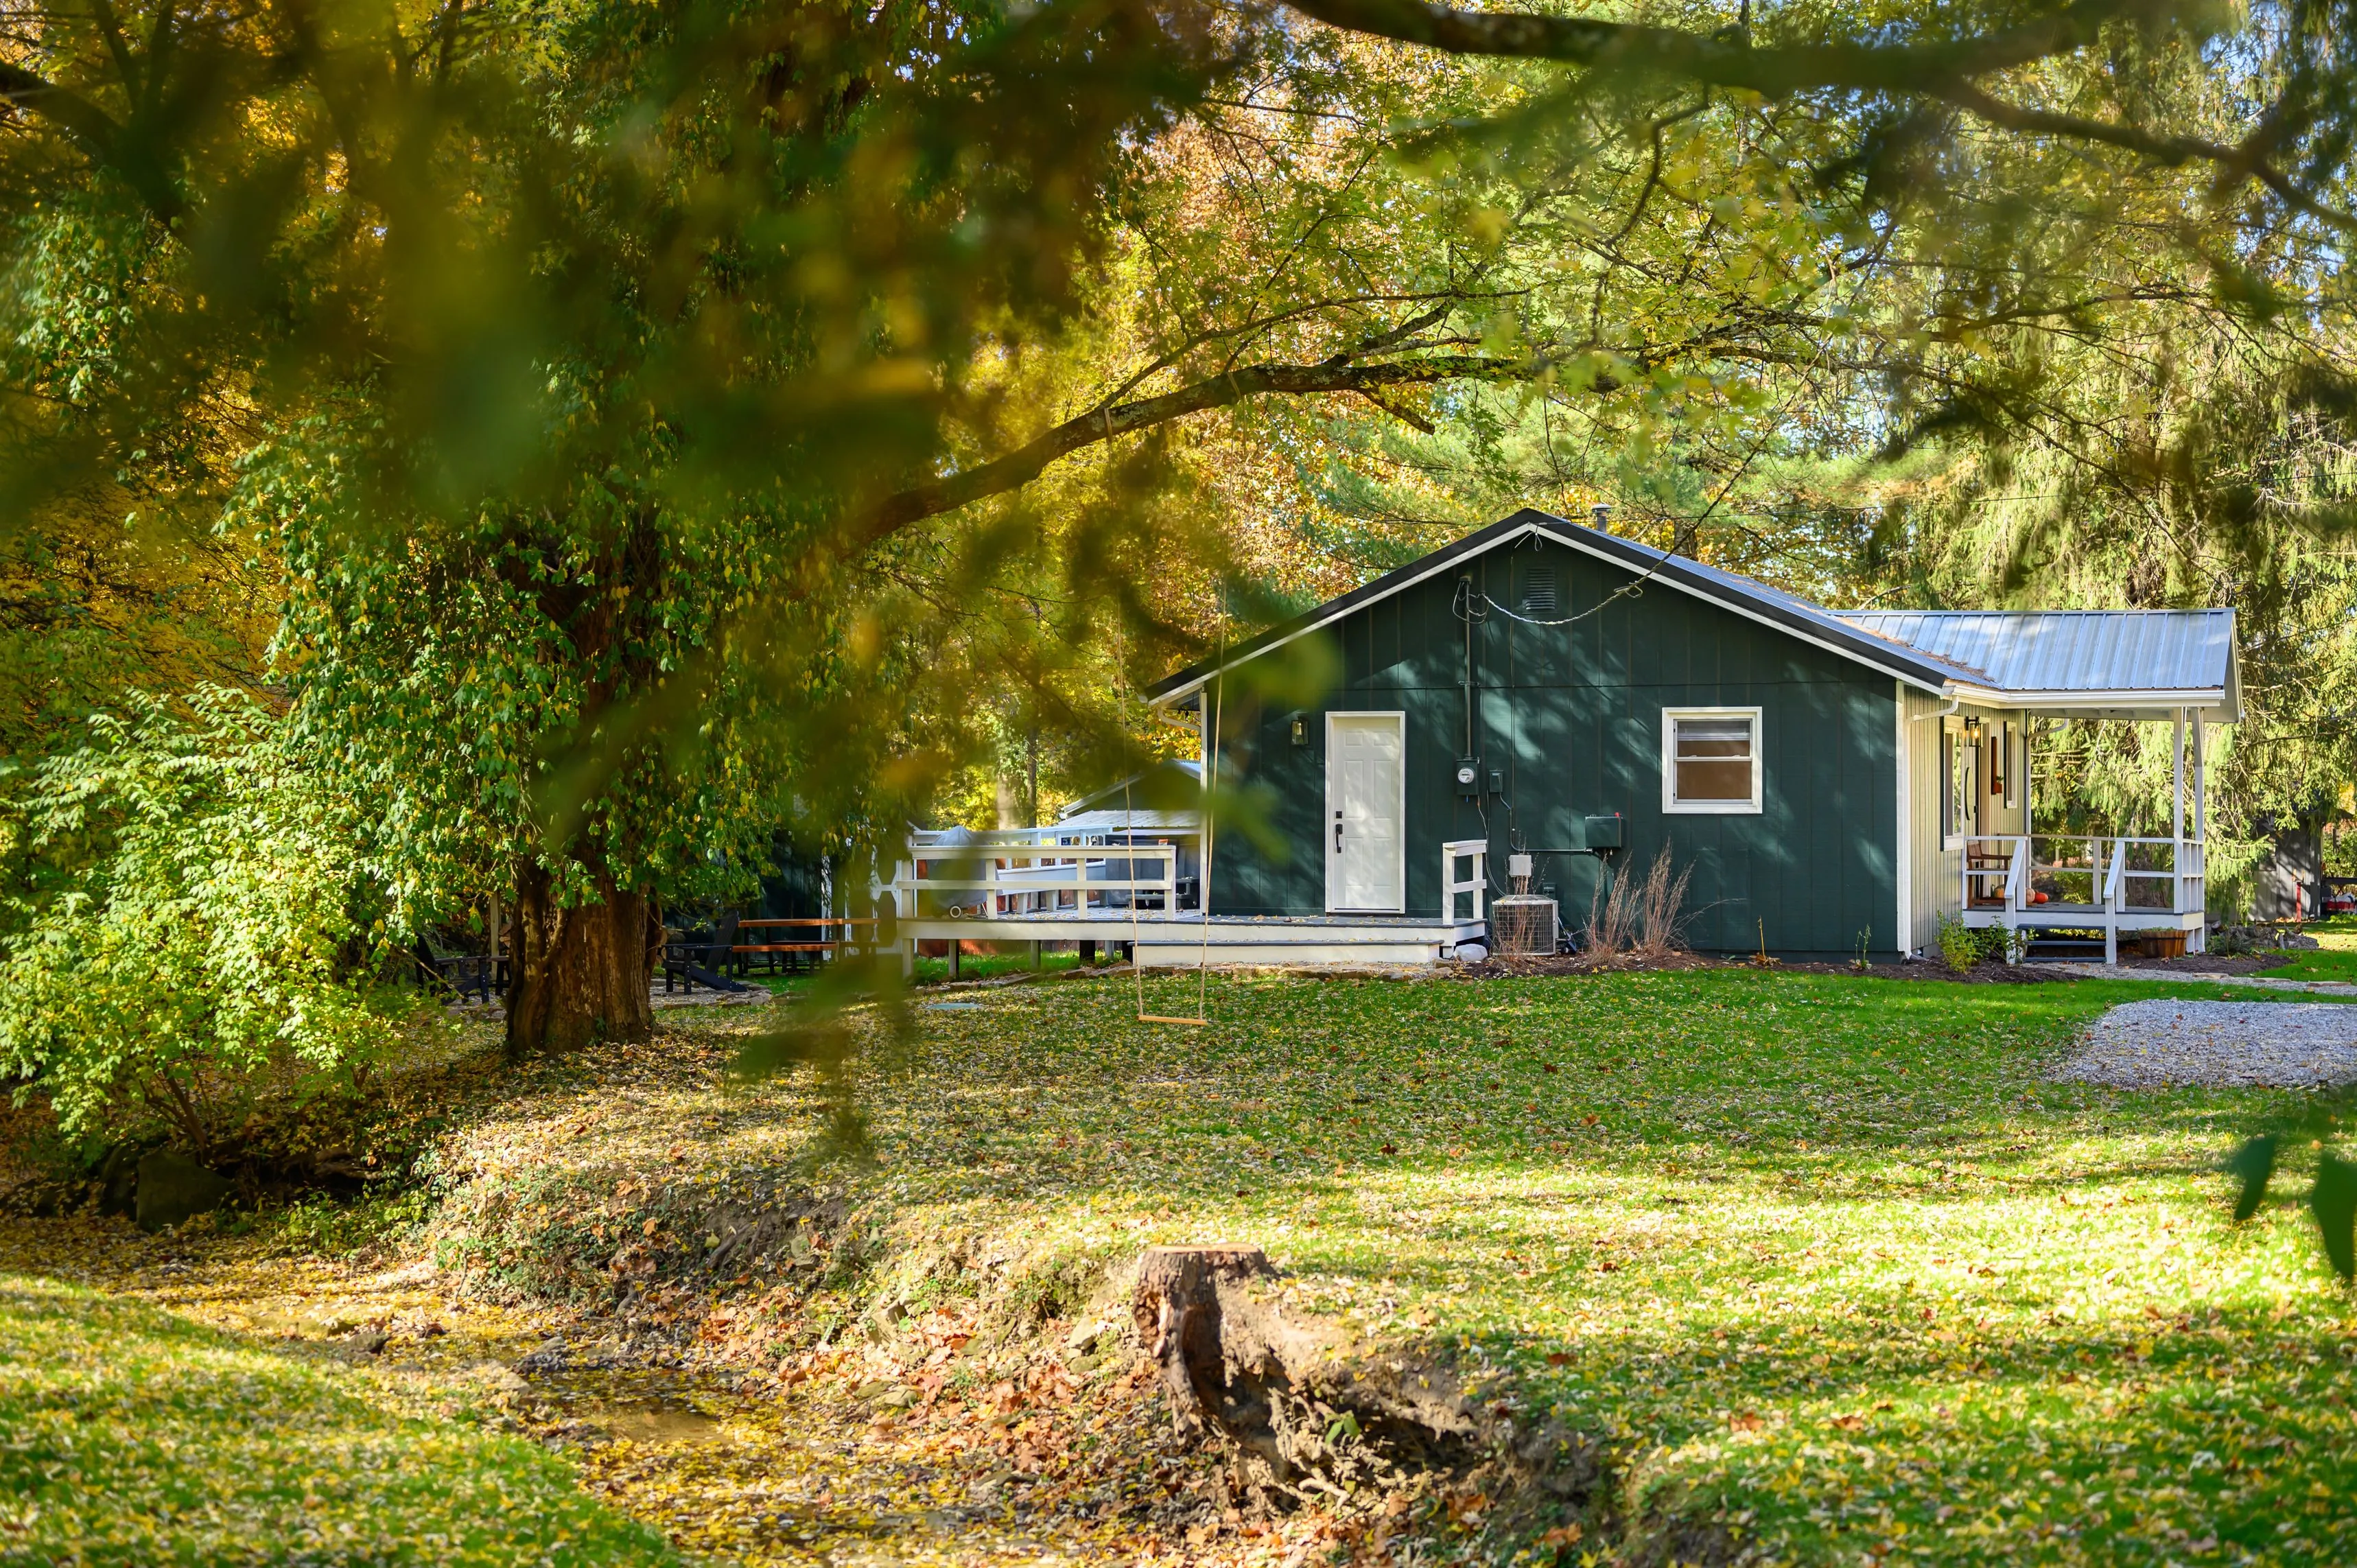 Cozy green cabin with a covered porch surrounded by autumn foliage in a serene wooded area.